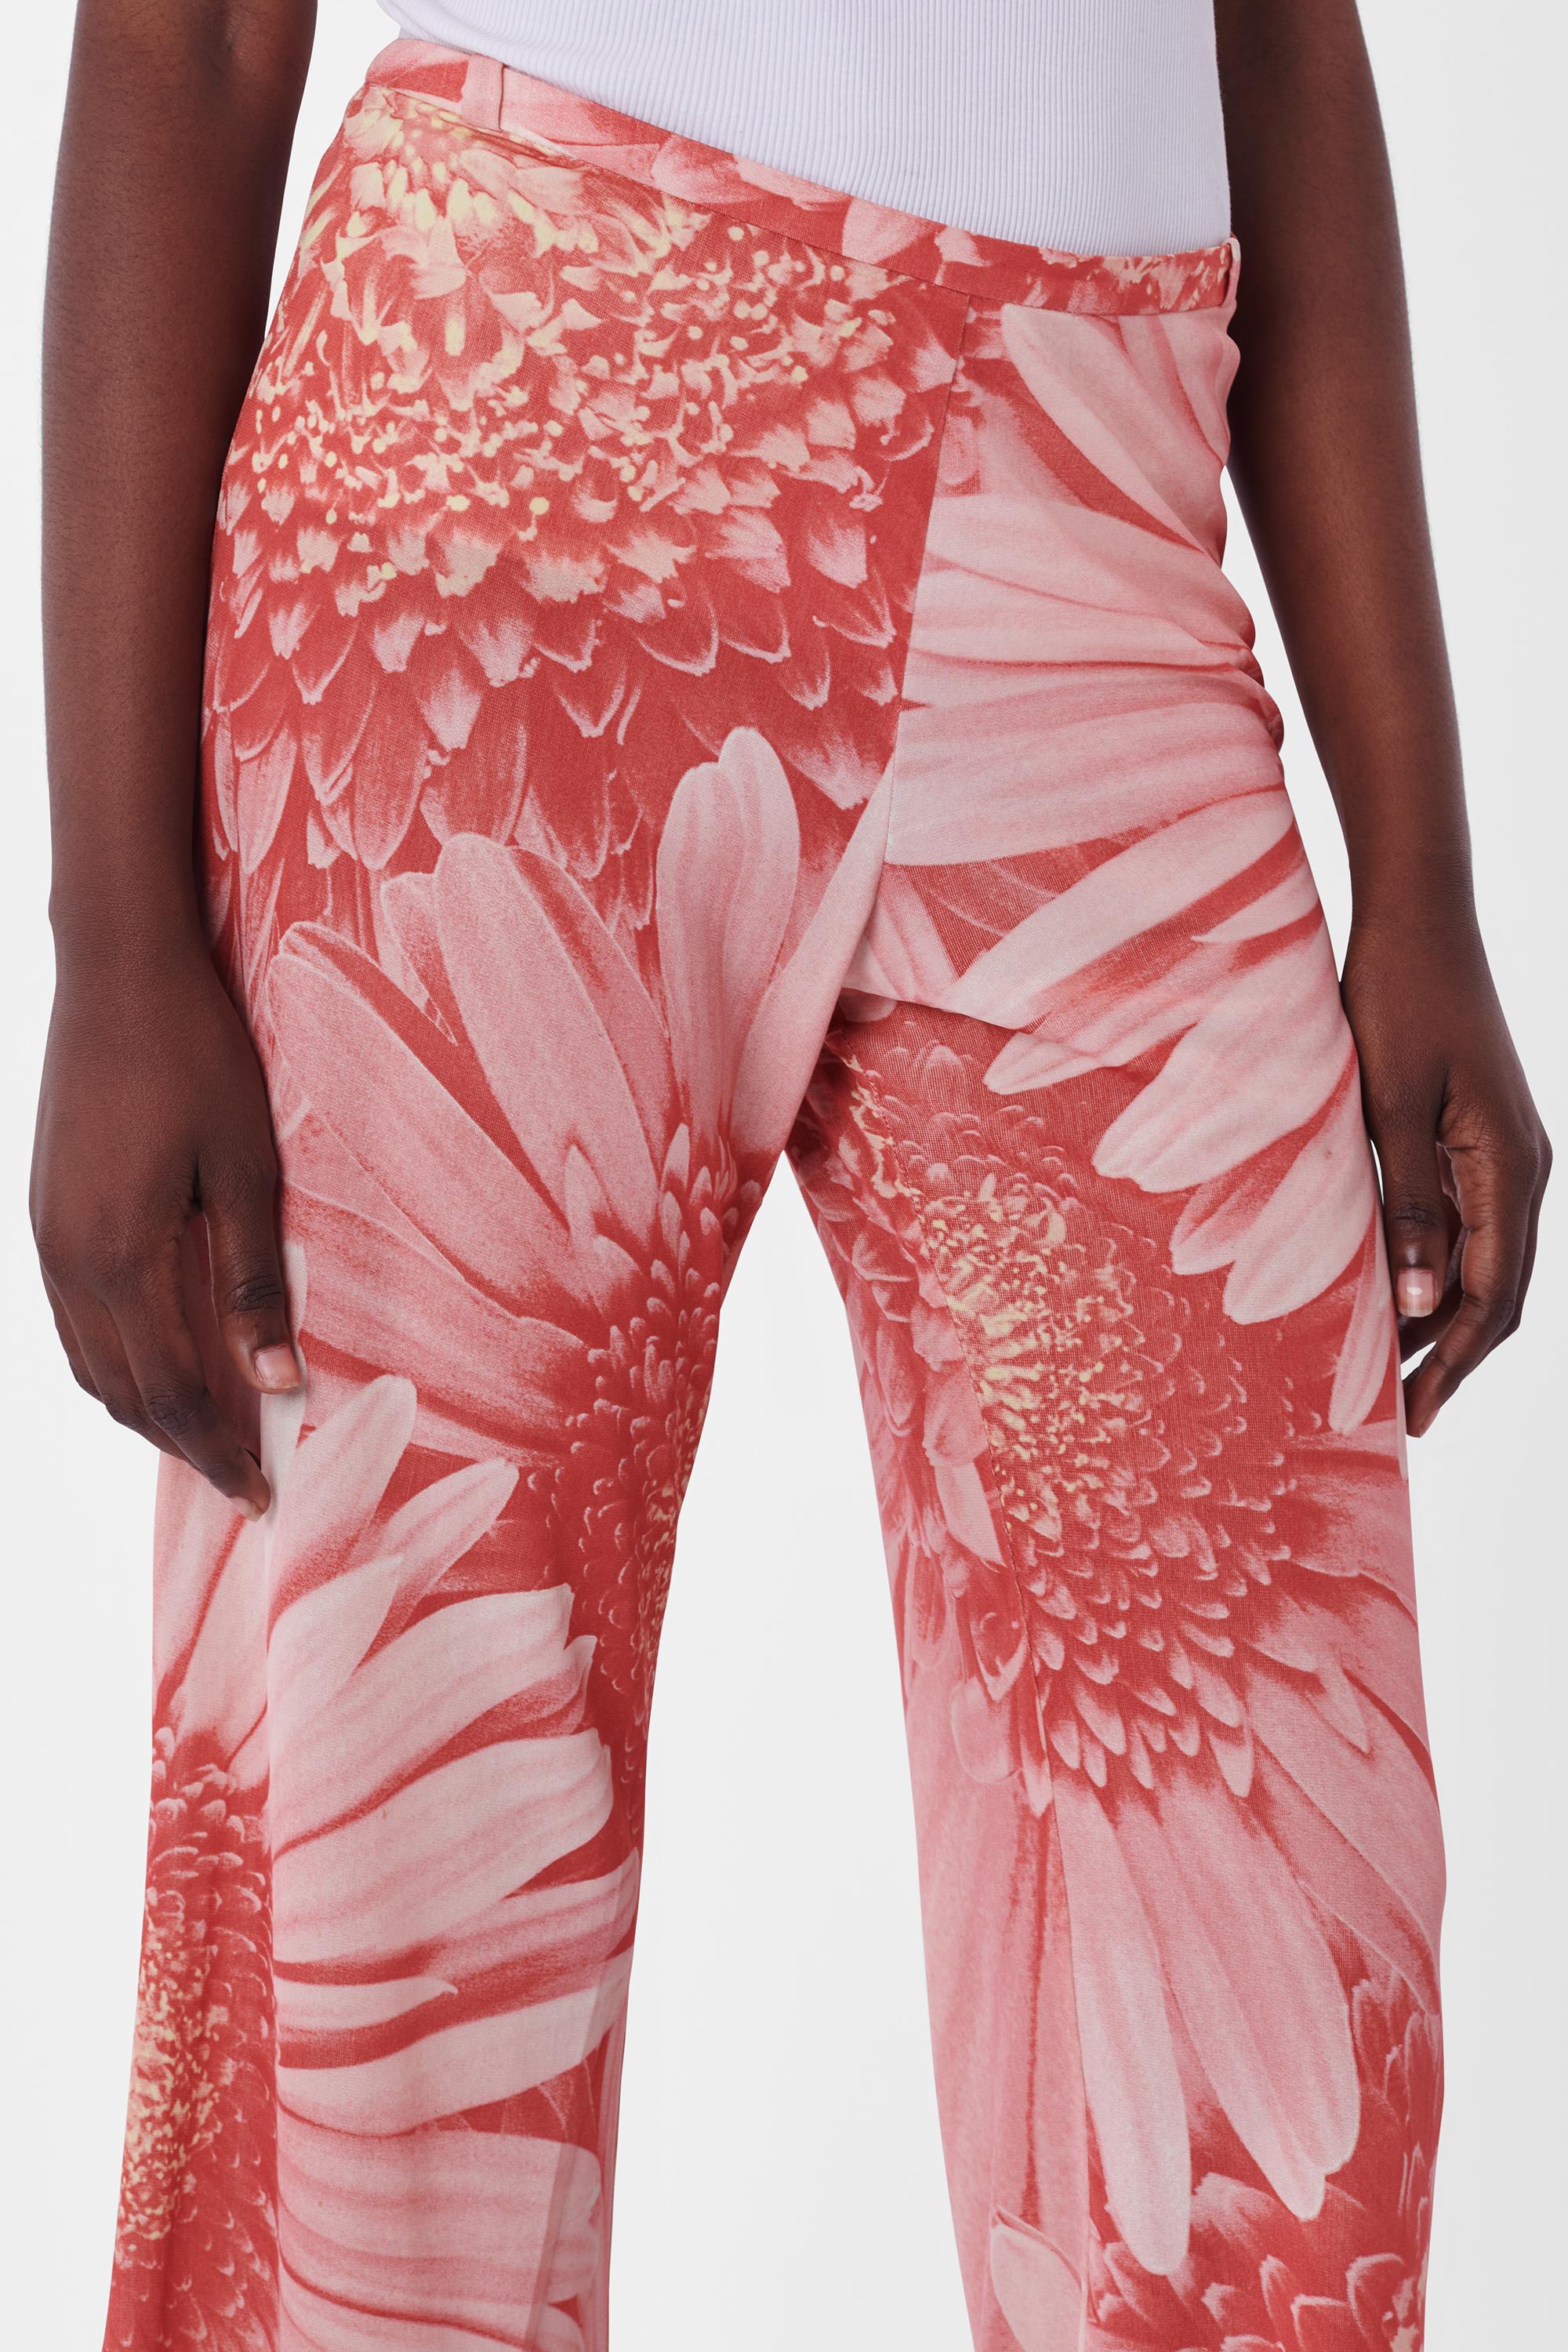 We are excited to present this Roberto Cavalli S/S 2000's Pink Floral Silk Trousers. Features a wide leg and low rise, concealed side zipper and belt loops. In excellent vintage condition. Authenticity guaranteed.

Label size: Medium
Modern size: UK